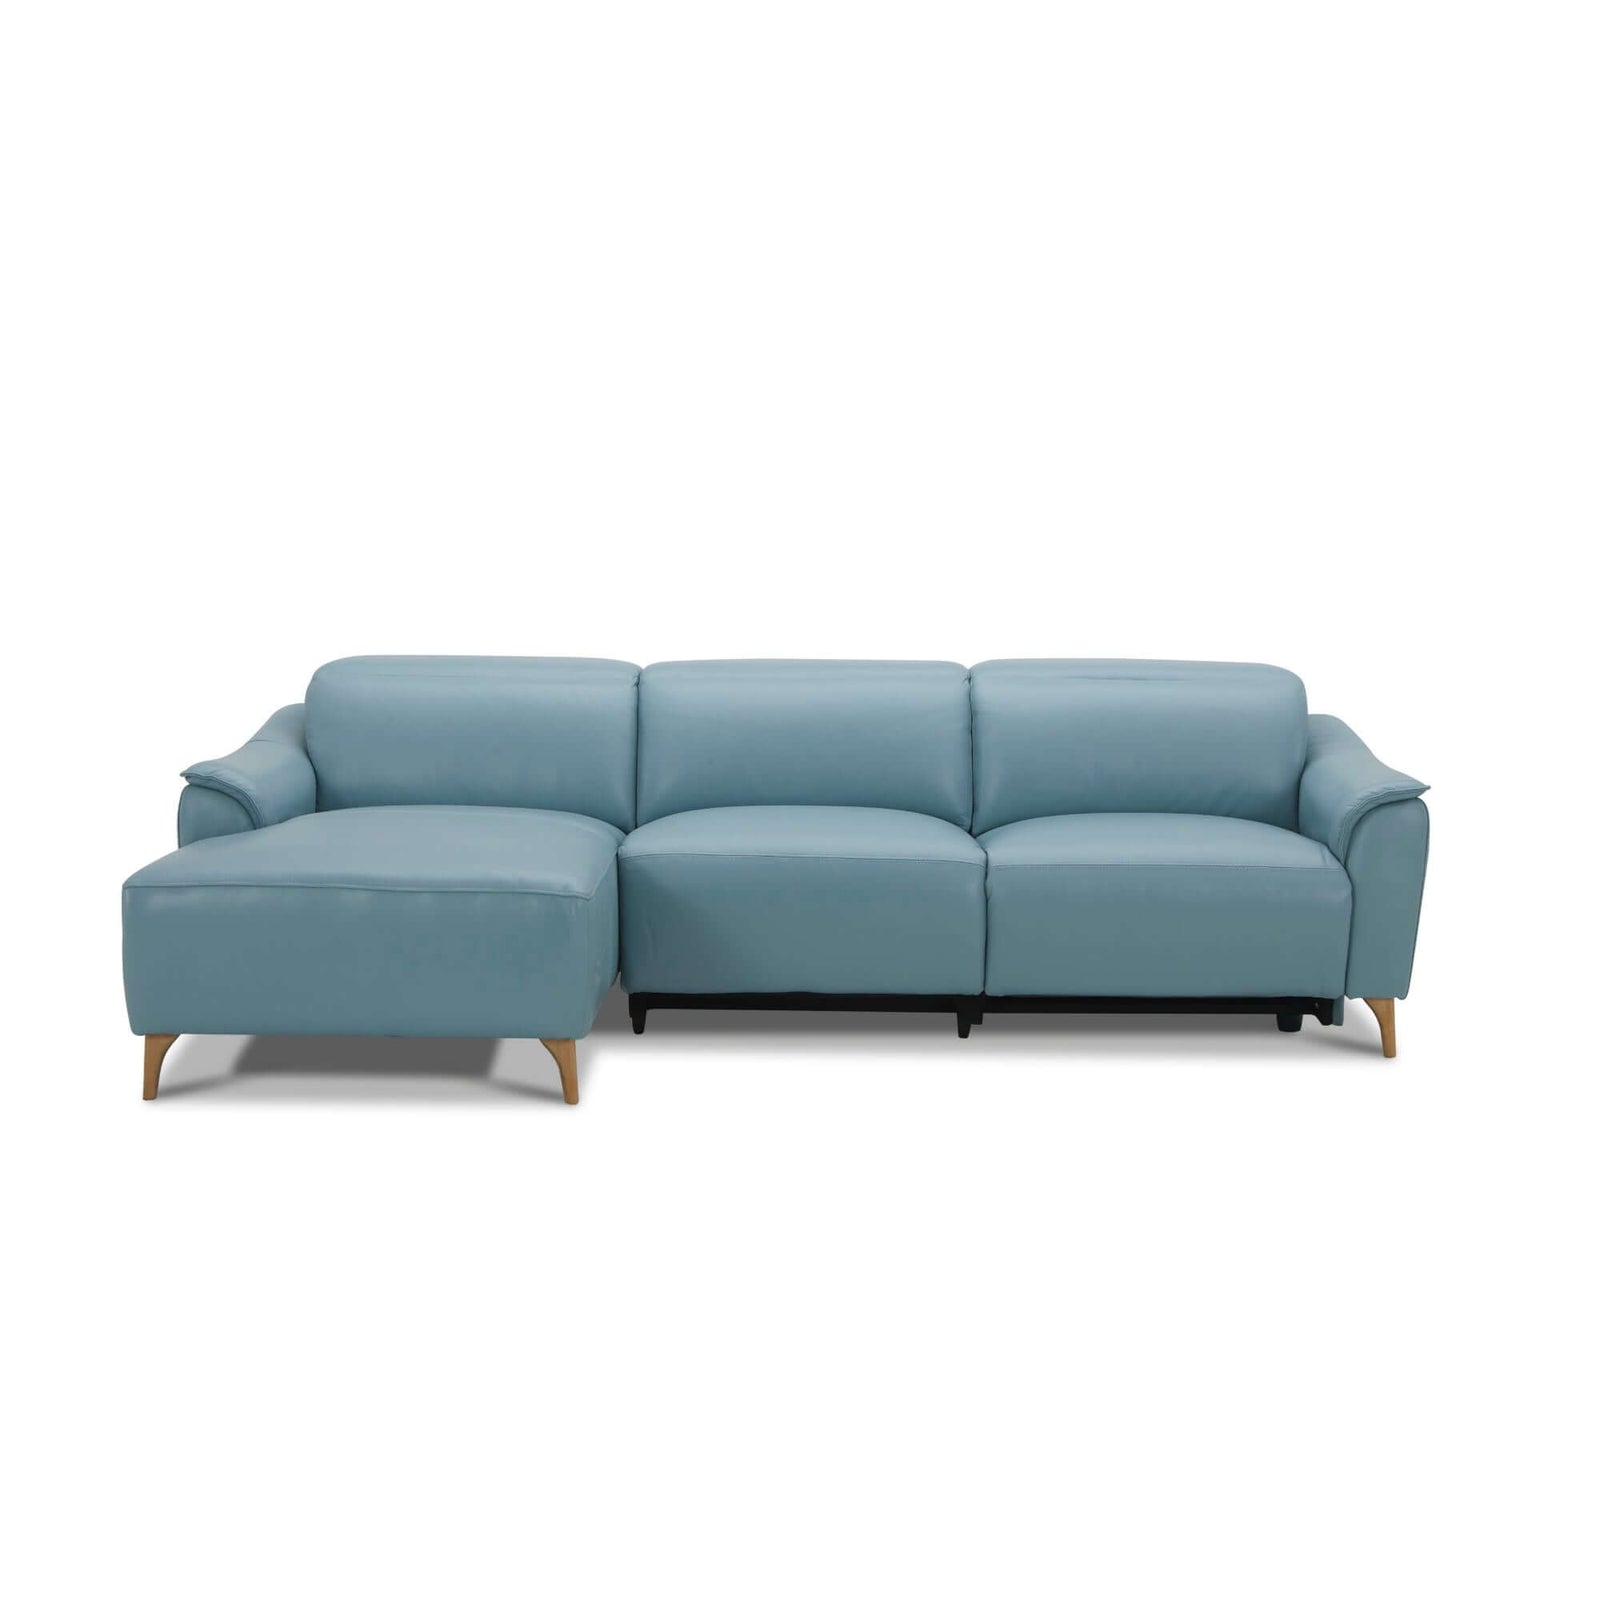 Inala 2 Seater Genuine Leather Sofa Lounge Electric Powered Recliner LHF Chaise Blue-Upinteriors